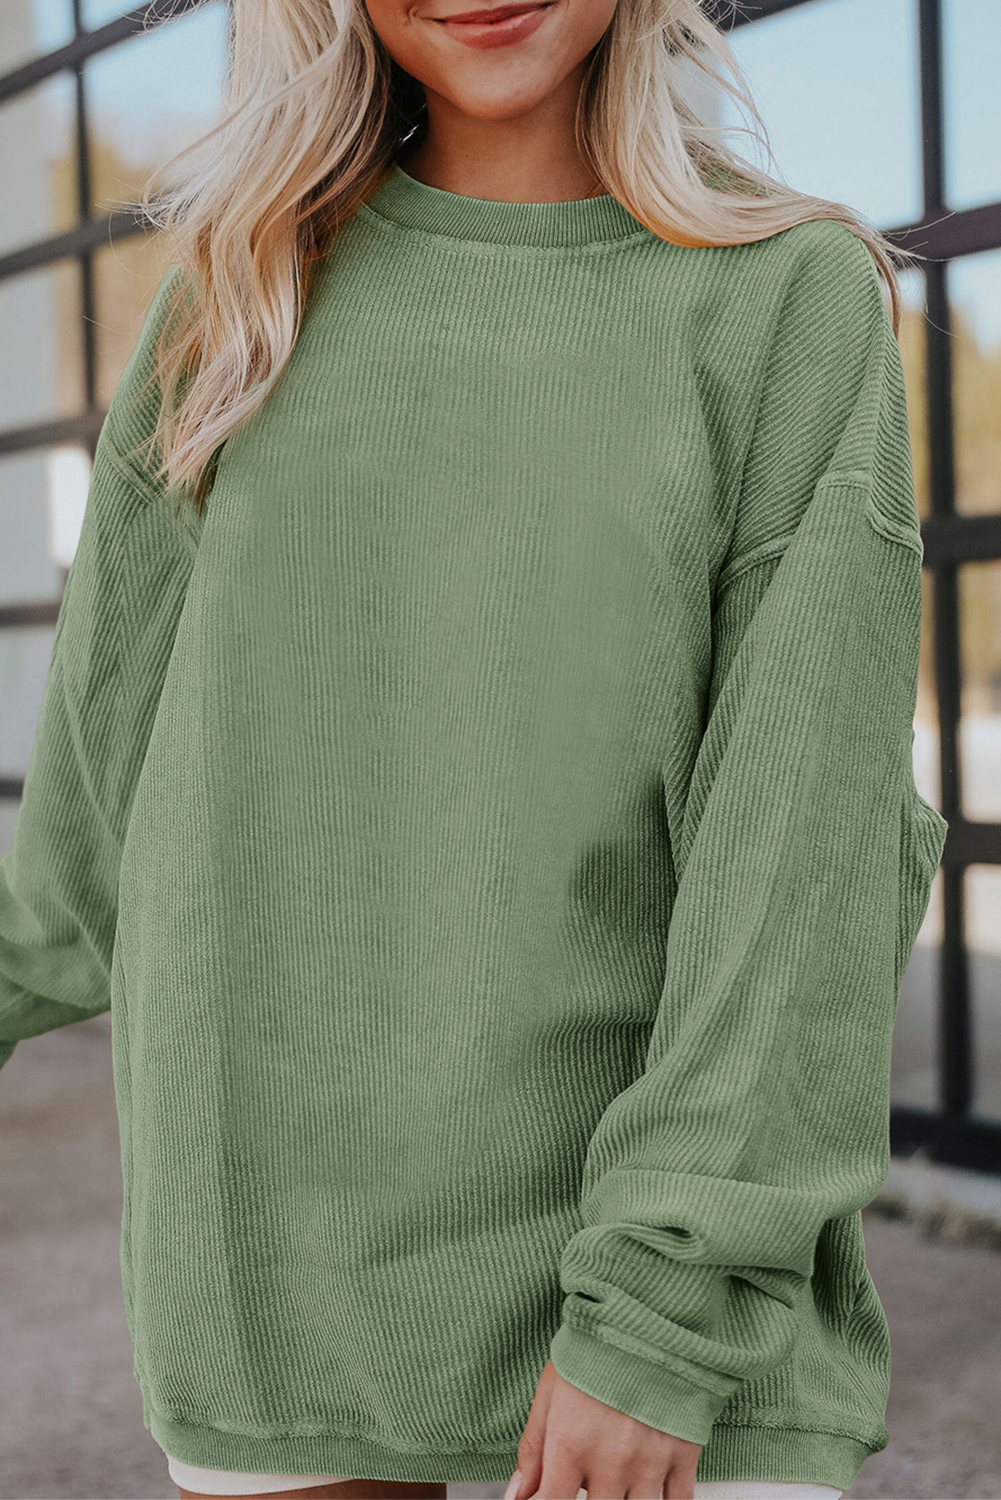 Shewin Wholesale Southern Clothing  Grass Green Ribbed Drop Shoulder Oversized Sweatshirt